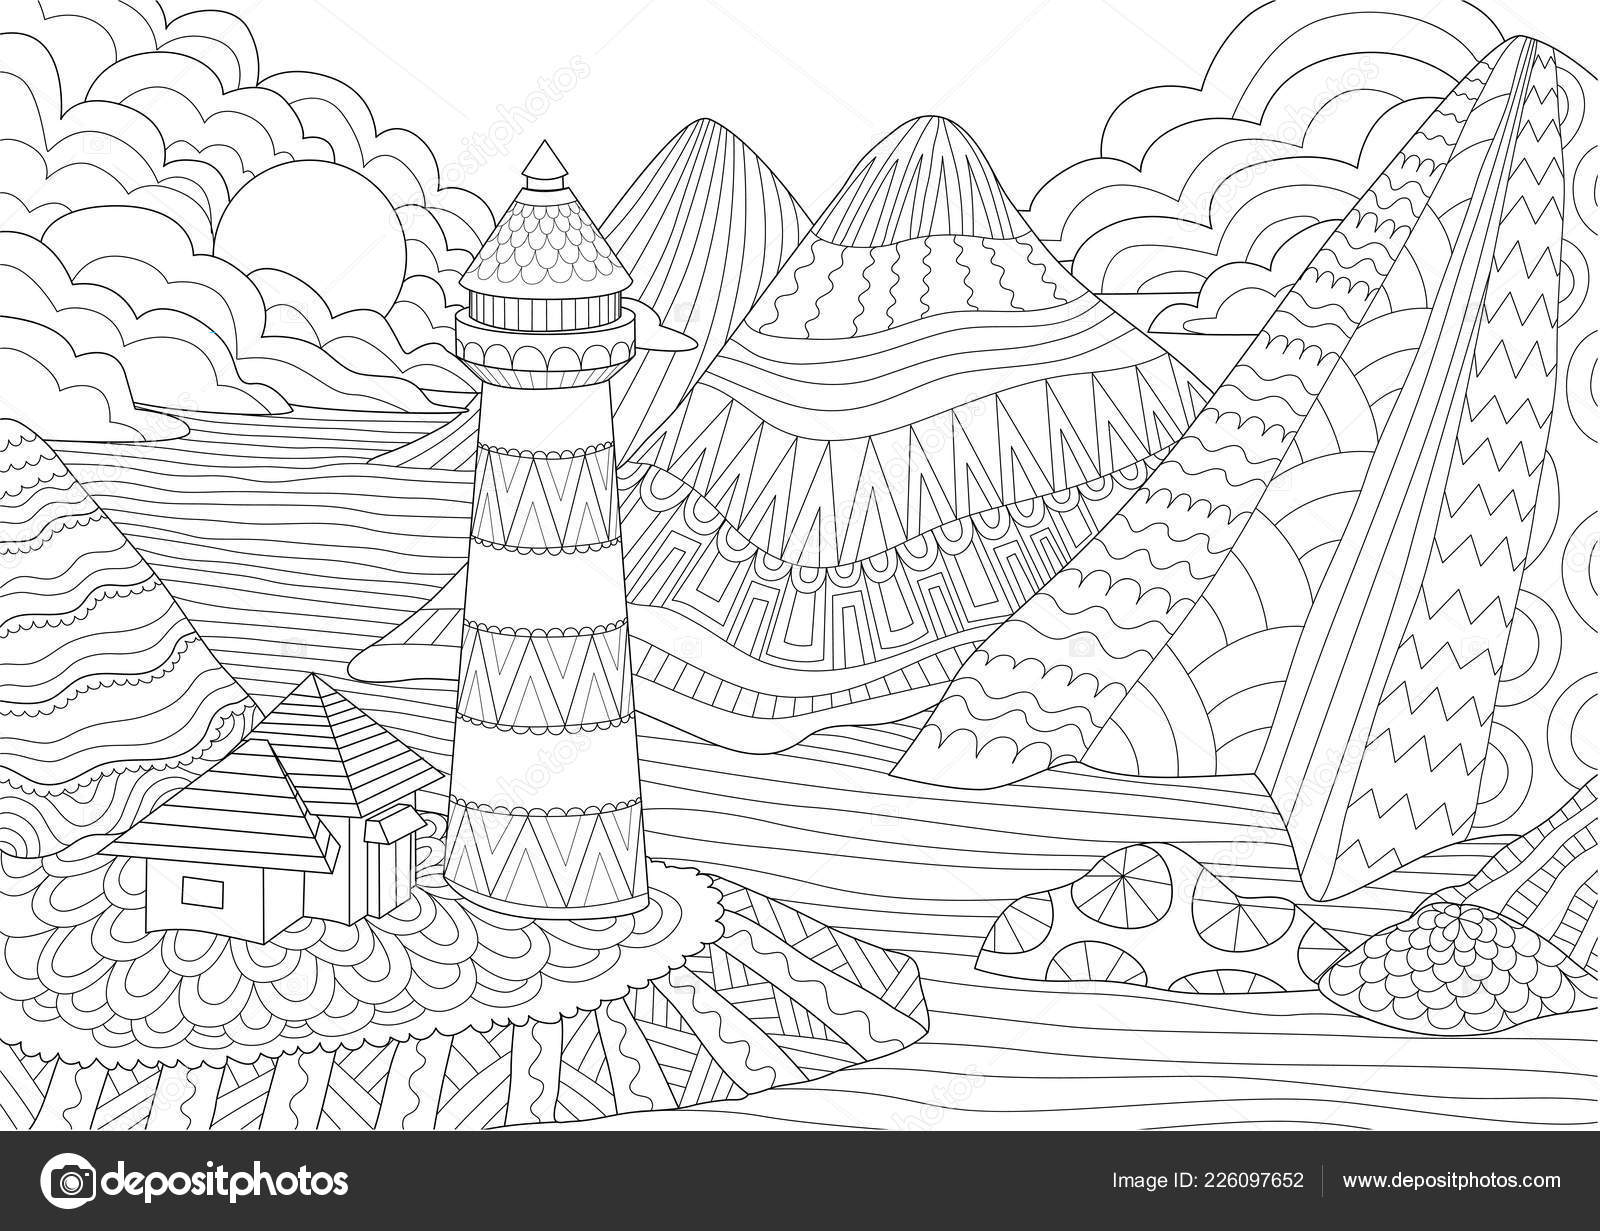 Coloring page coloring book adults colouring pictures light house mountains stock vector by somjaicindygmail